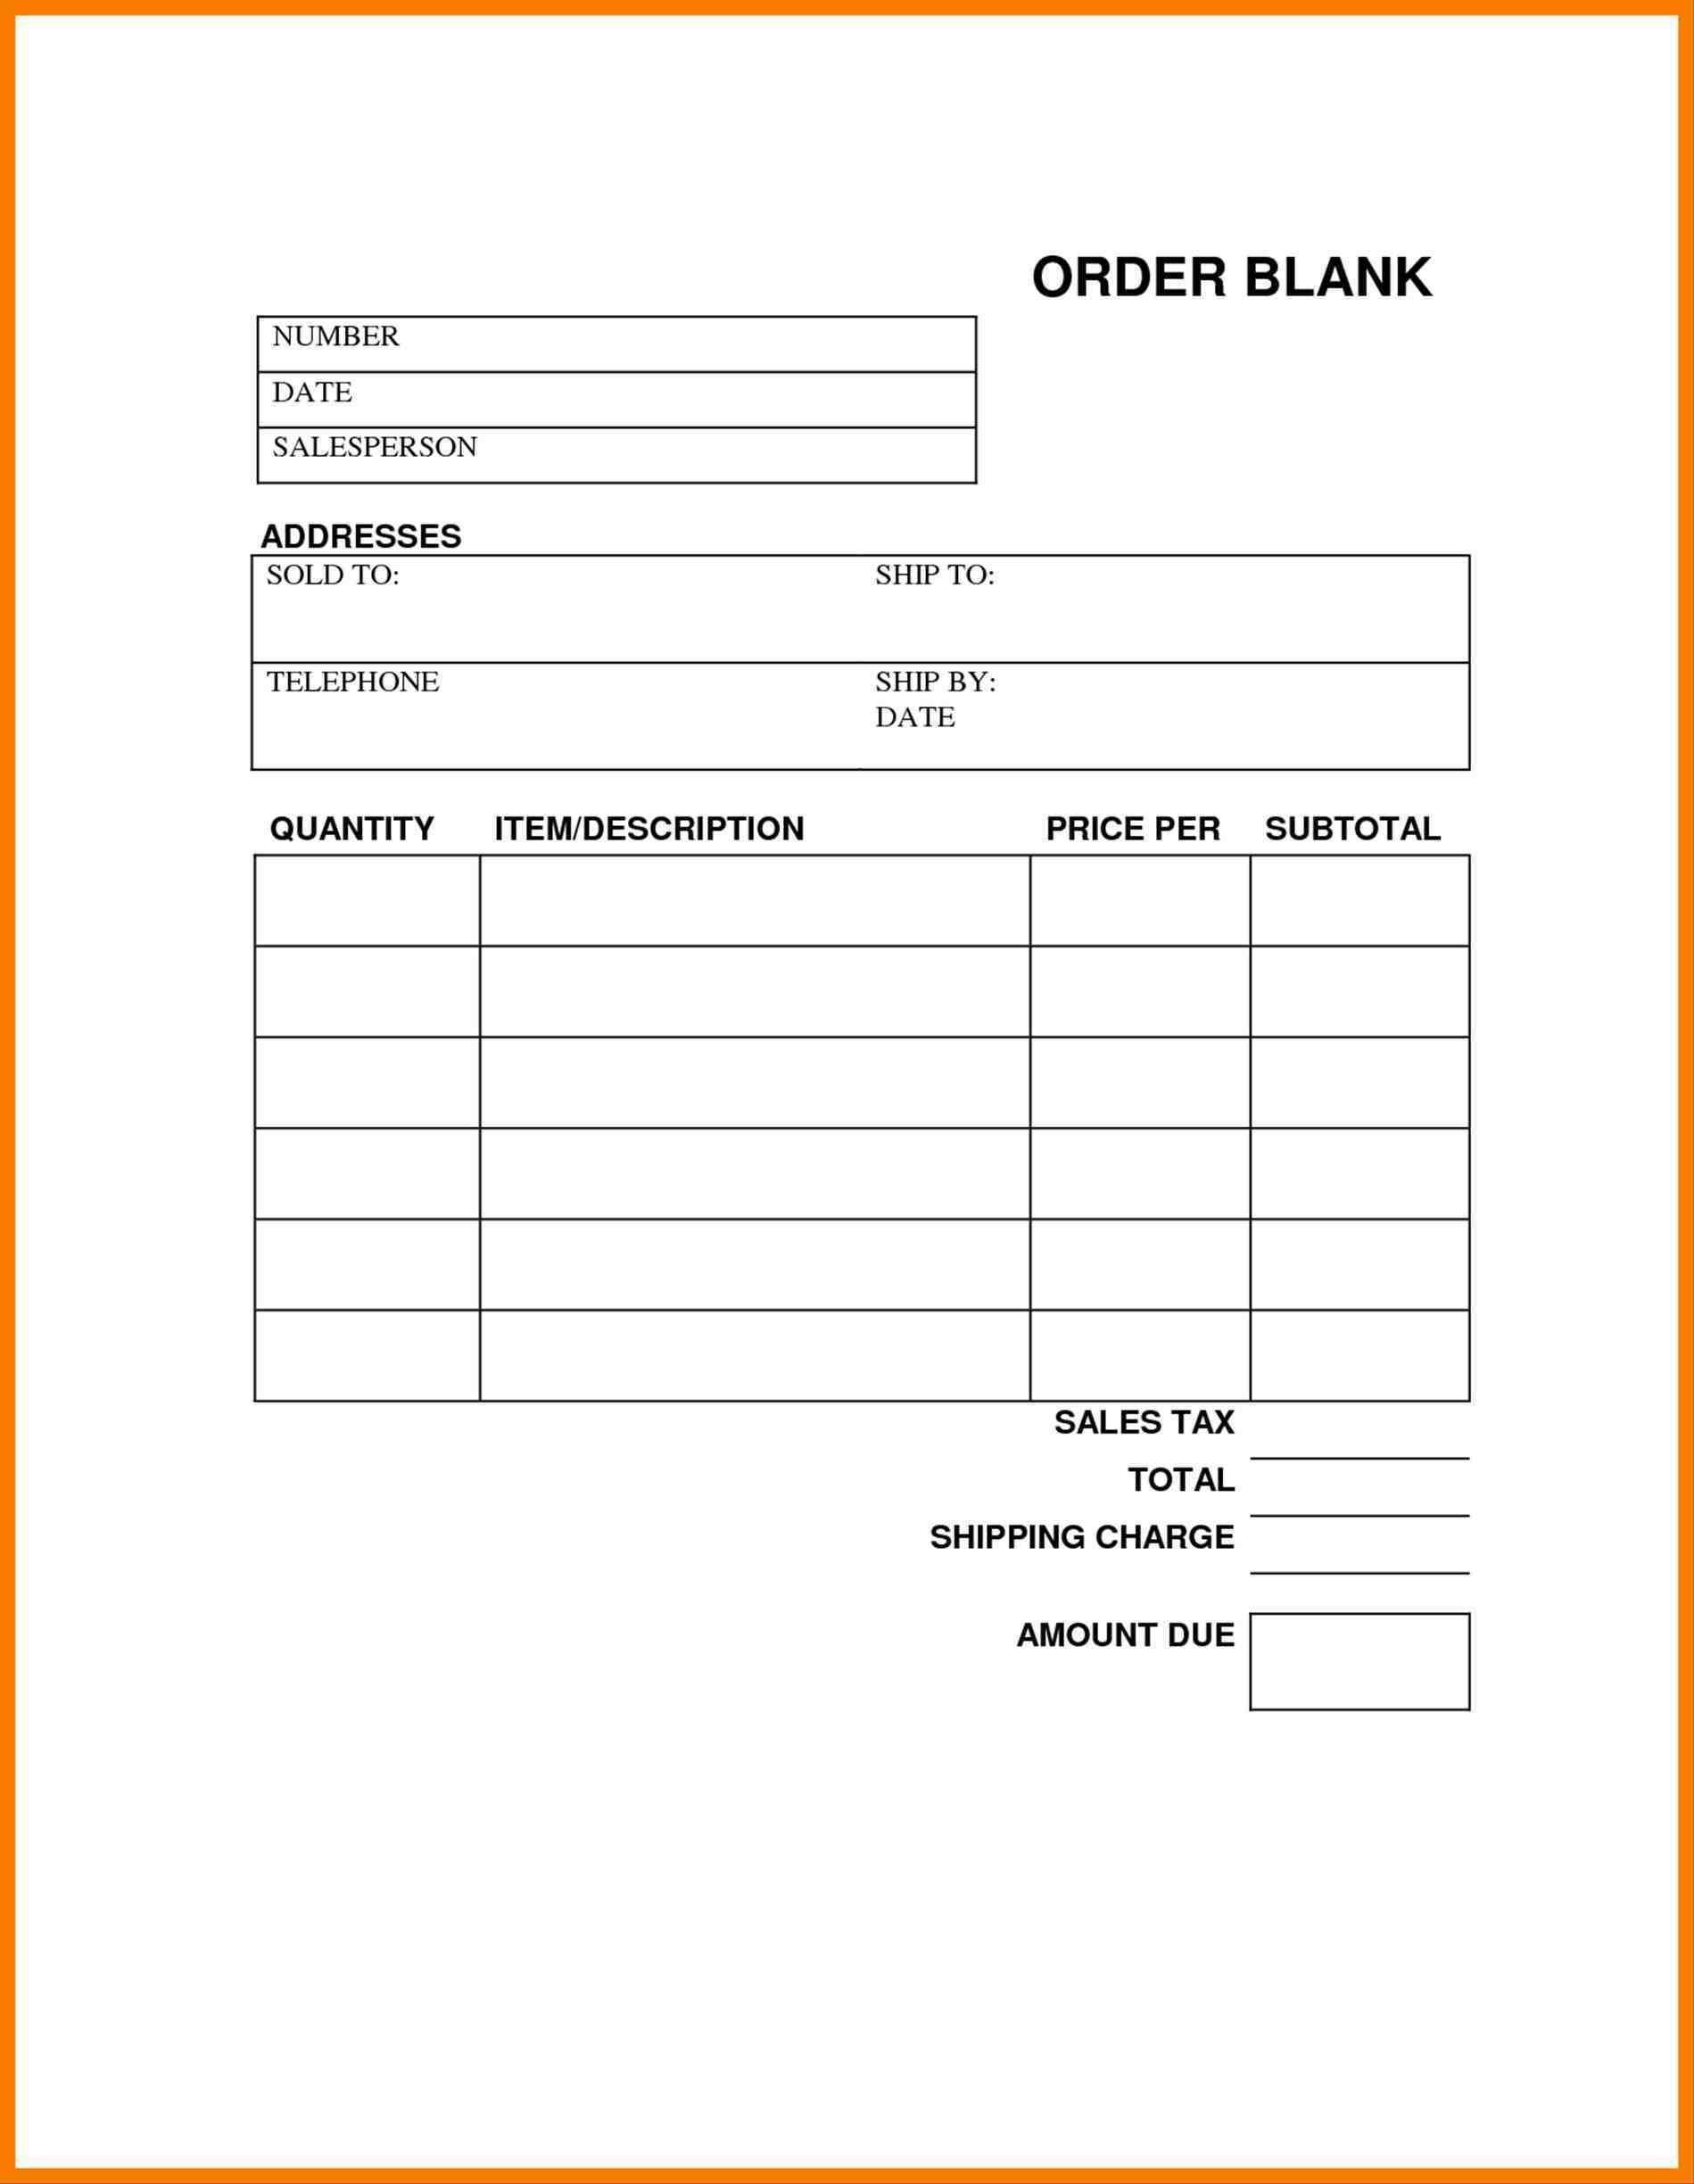 Blank Order Forms Templates Free | Free Tamplate | Order form 